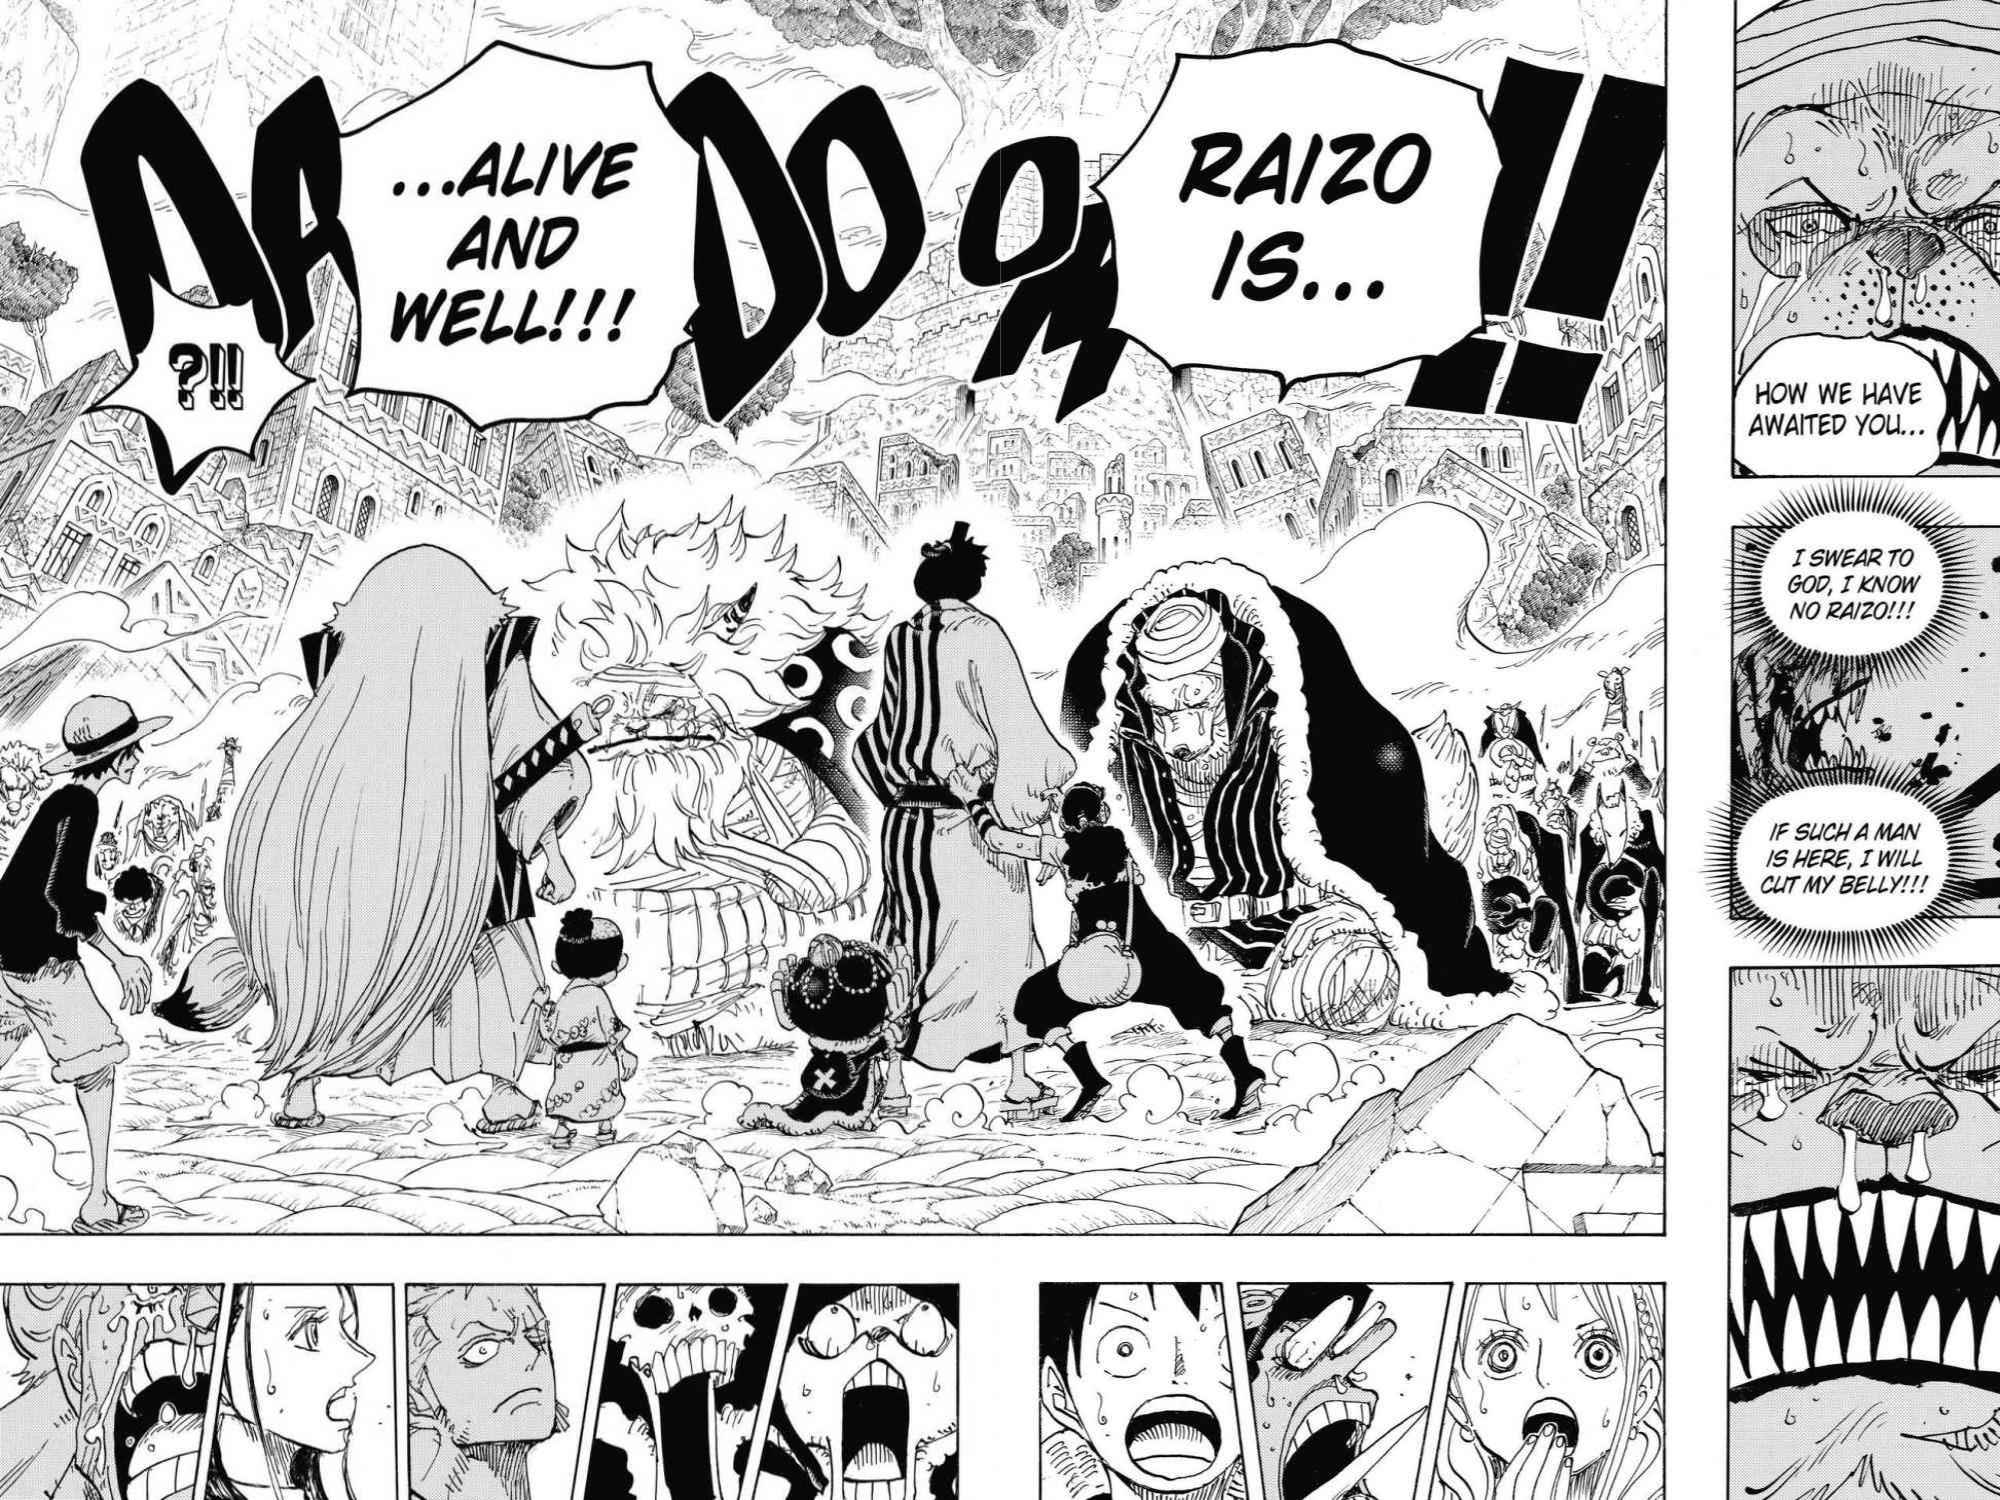 You are reading One Piece manga chapter 816 in English. 